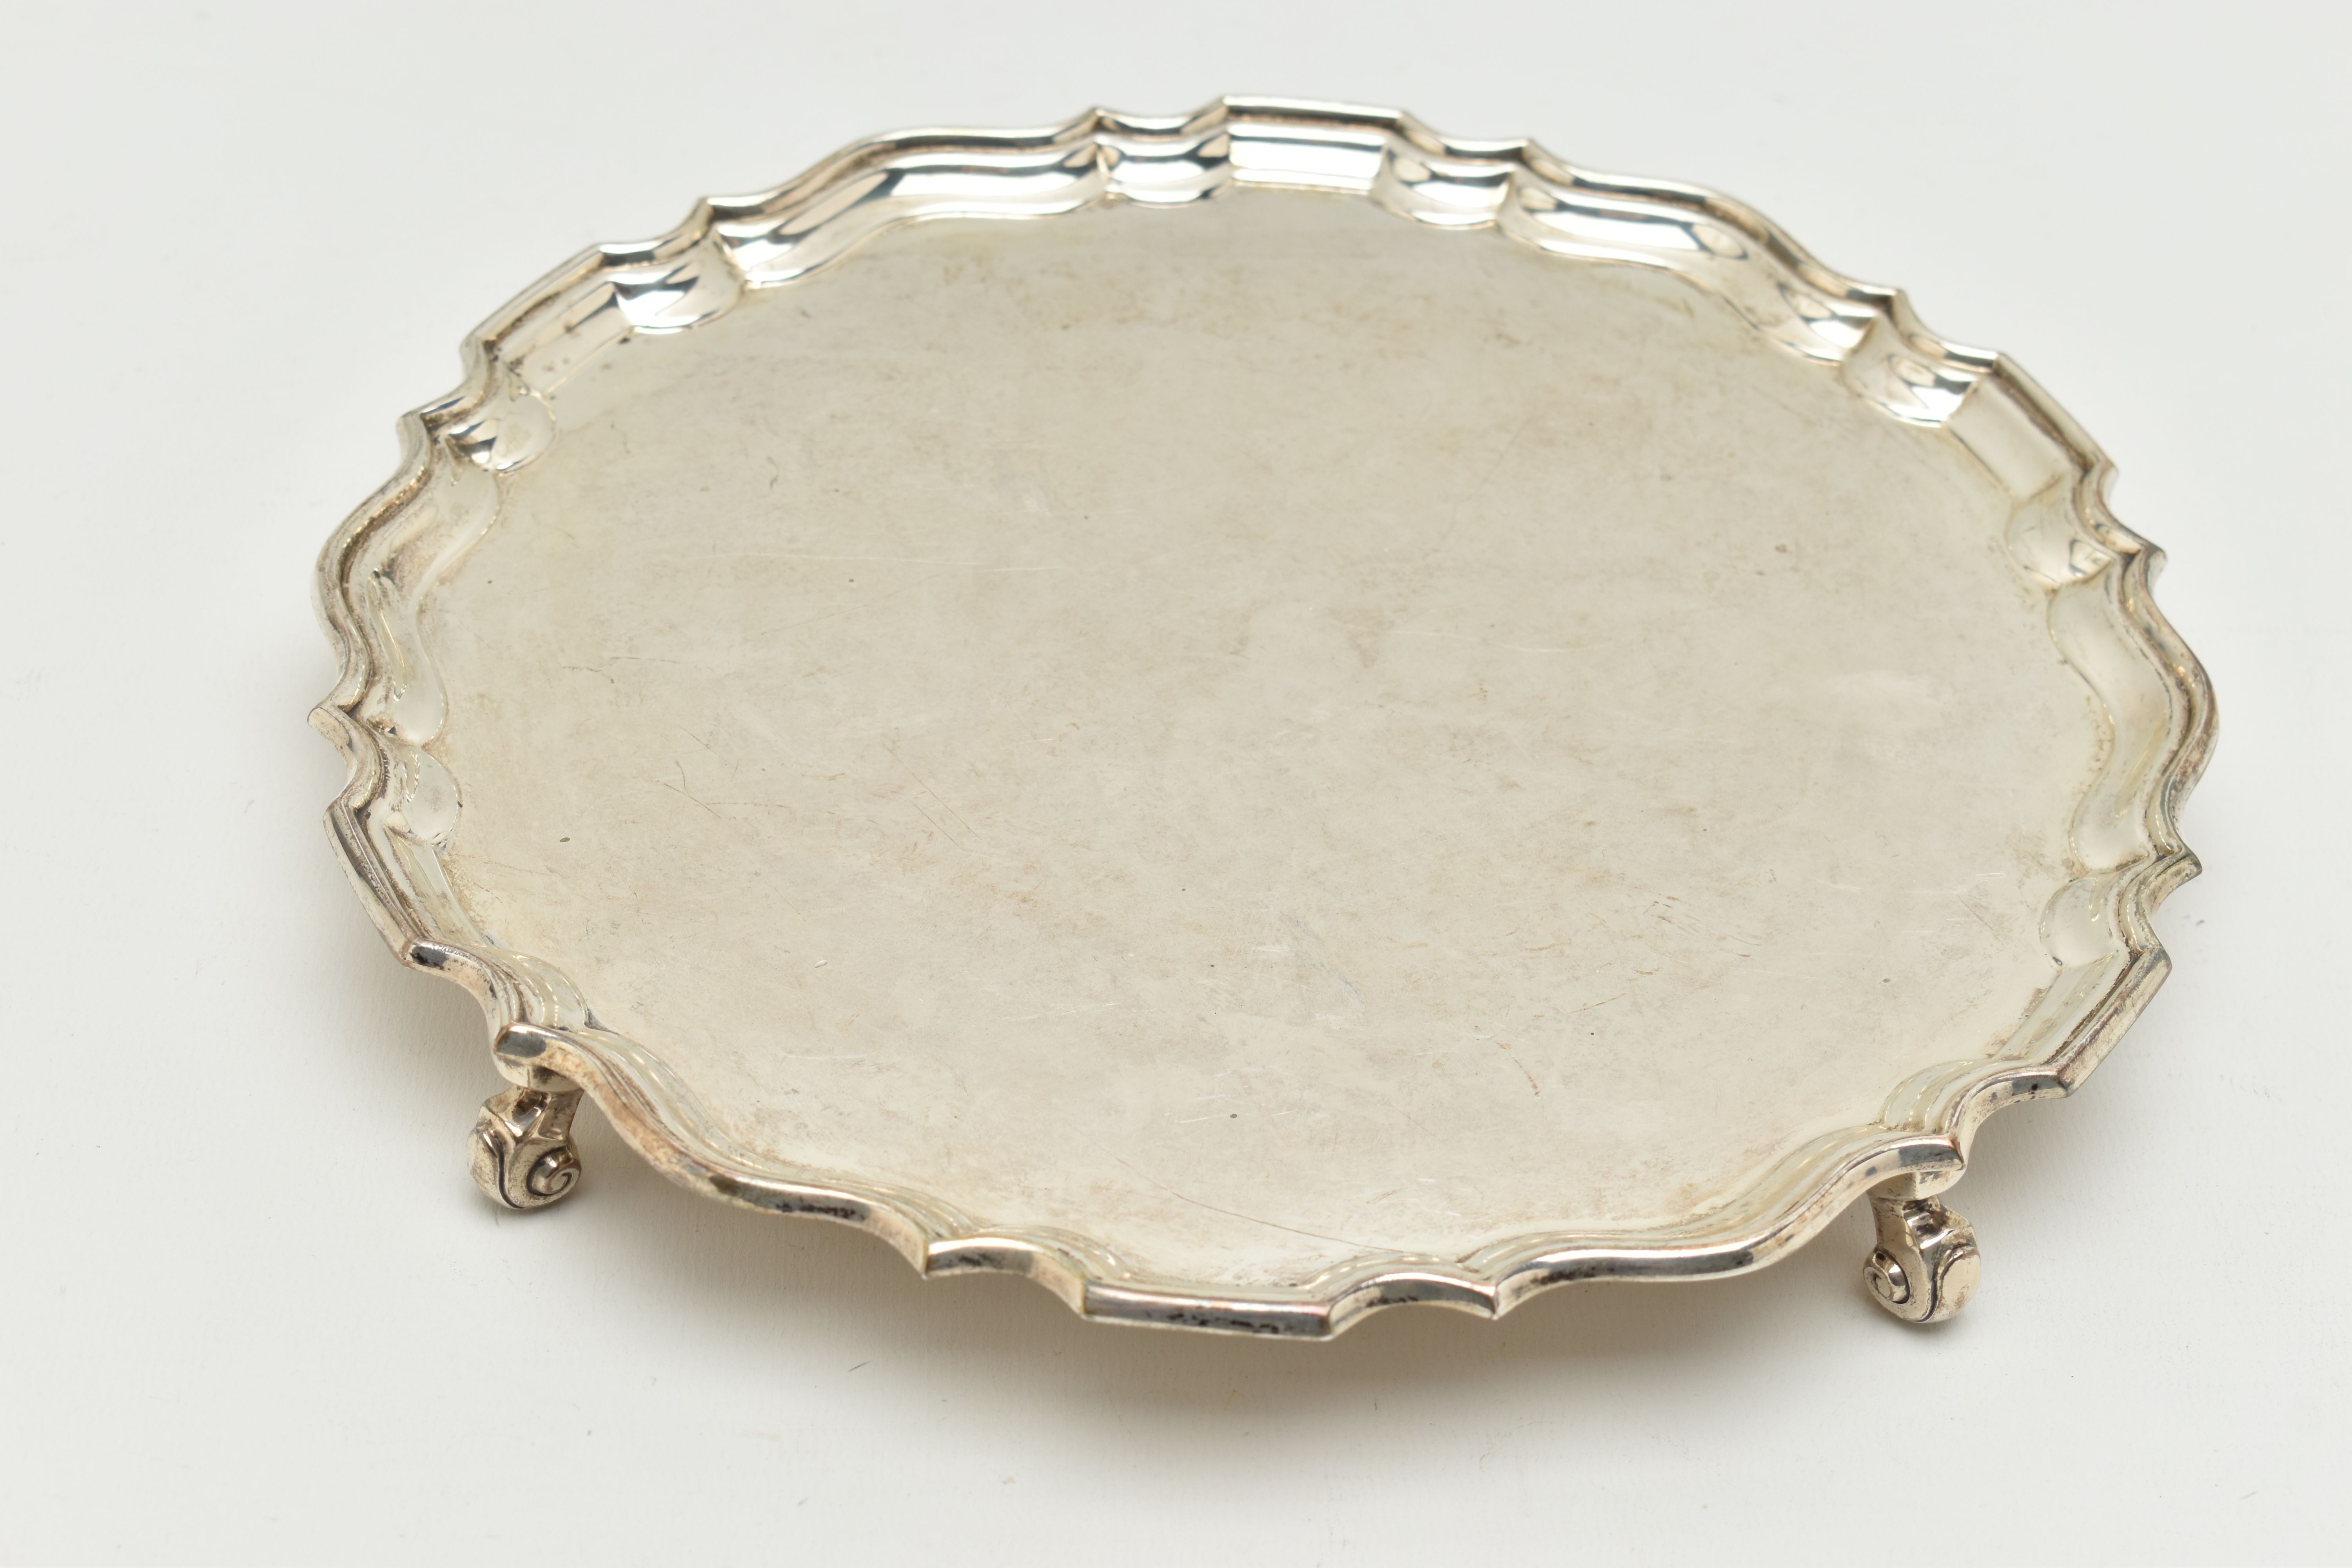 A GEORGE V SILVER SALVER, a circular form salver with a fluted border, raised on four scrolled feet, - Image 5 of 6